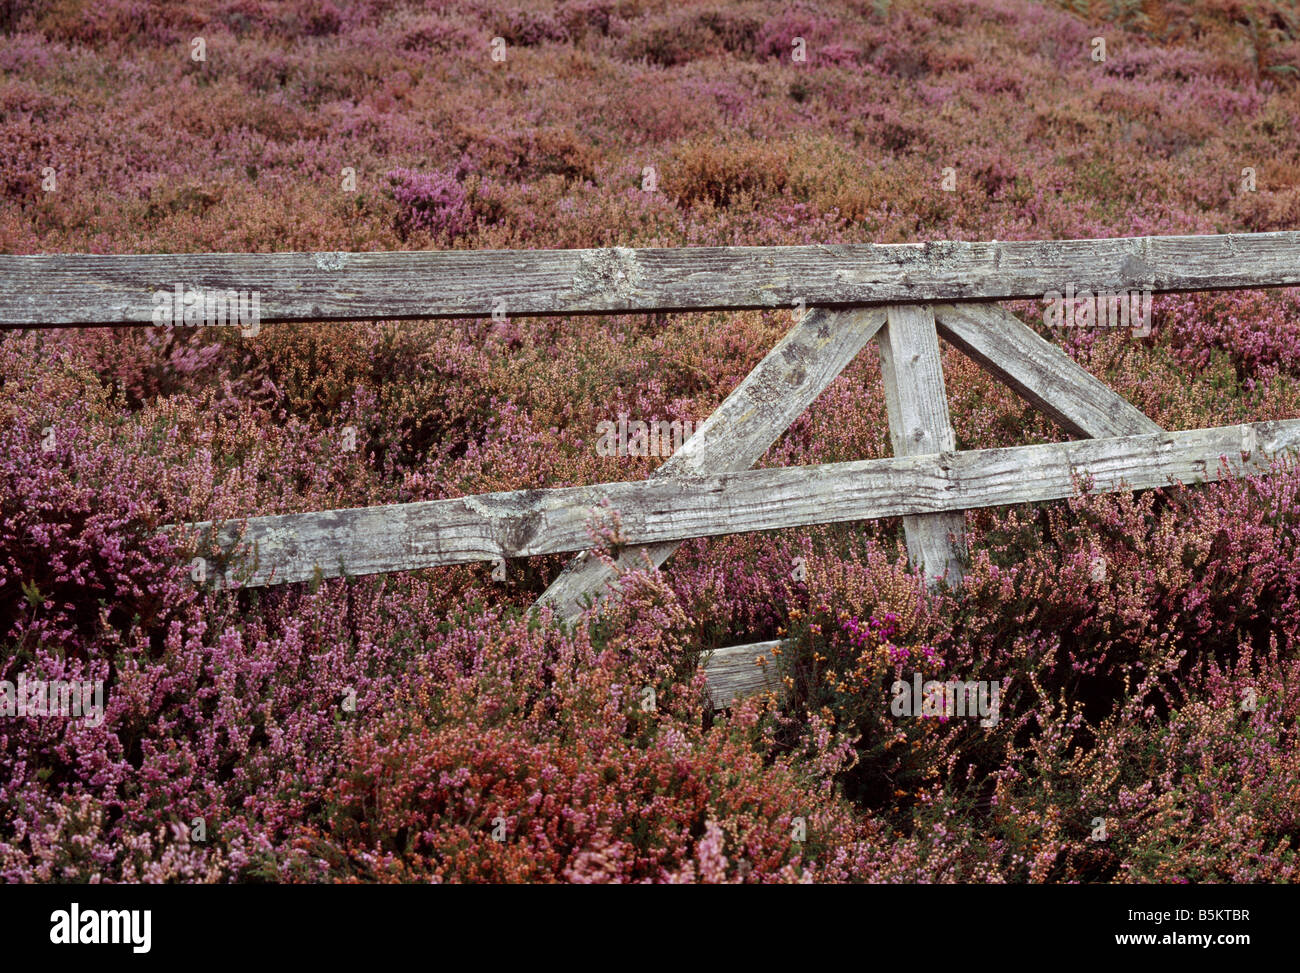 Old wooden gate overgrown with heather. Isle of Arran, North Ayrshire, Scotland, UK. Stock Photo